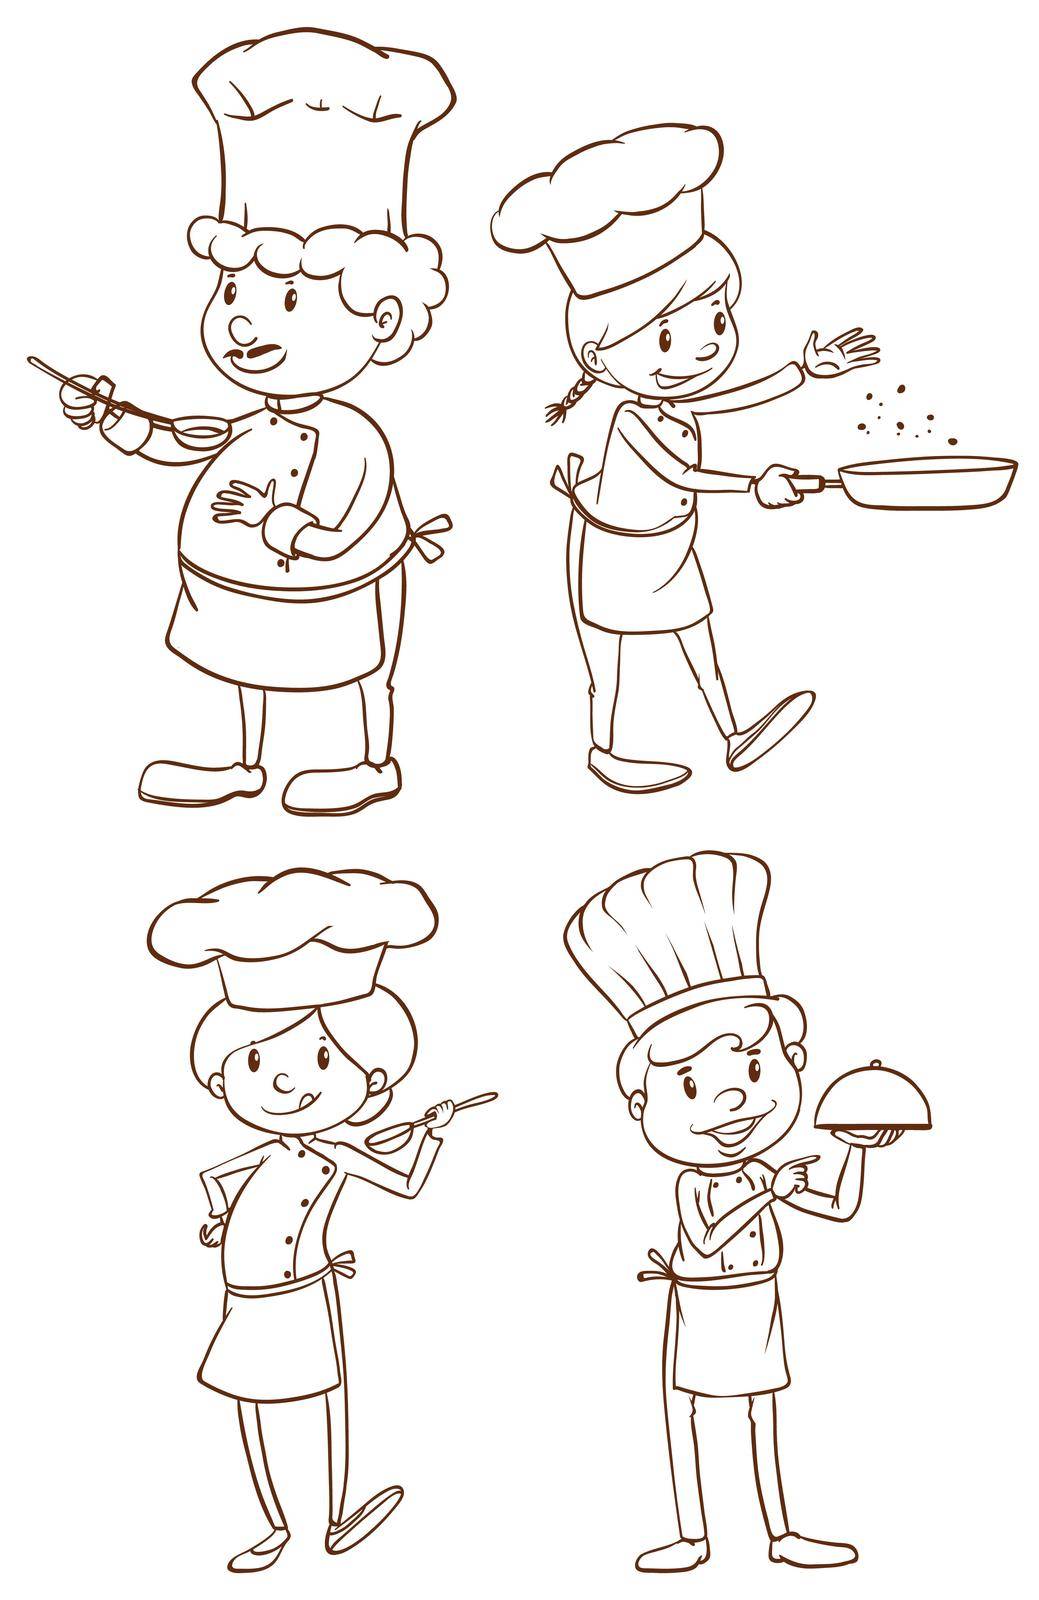 Illustration of the simple plain sketches of the chefs on a white background